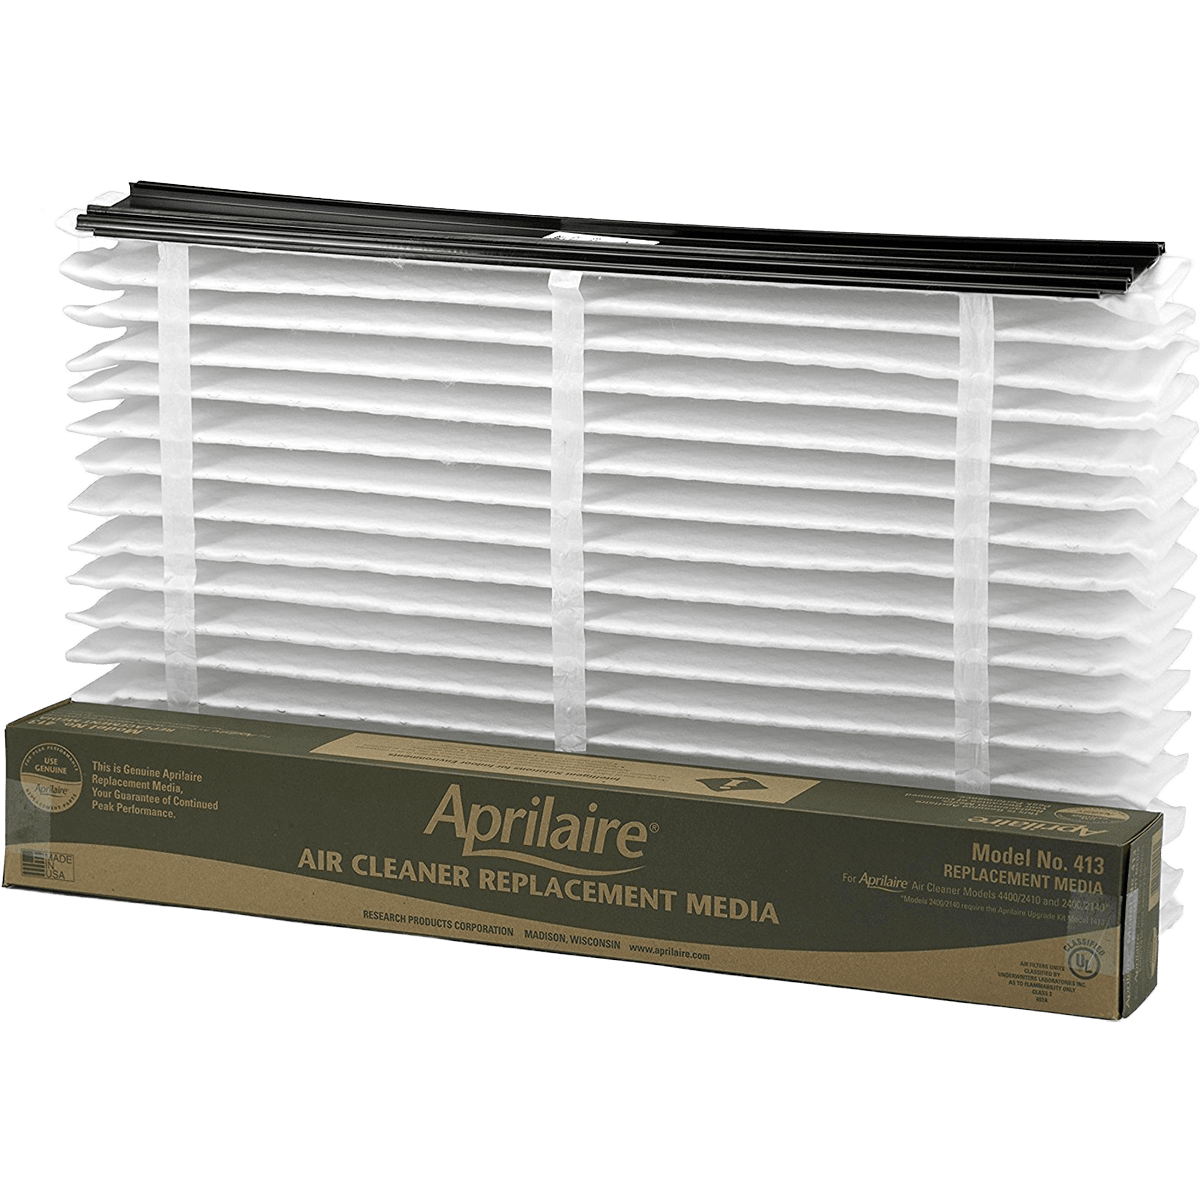 Aprilaire 413 Air Filter - Primary View